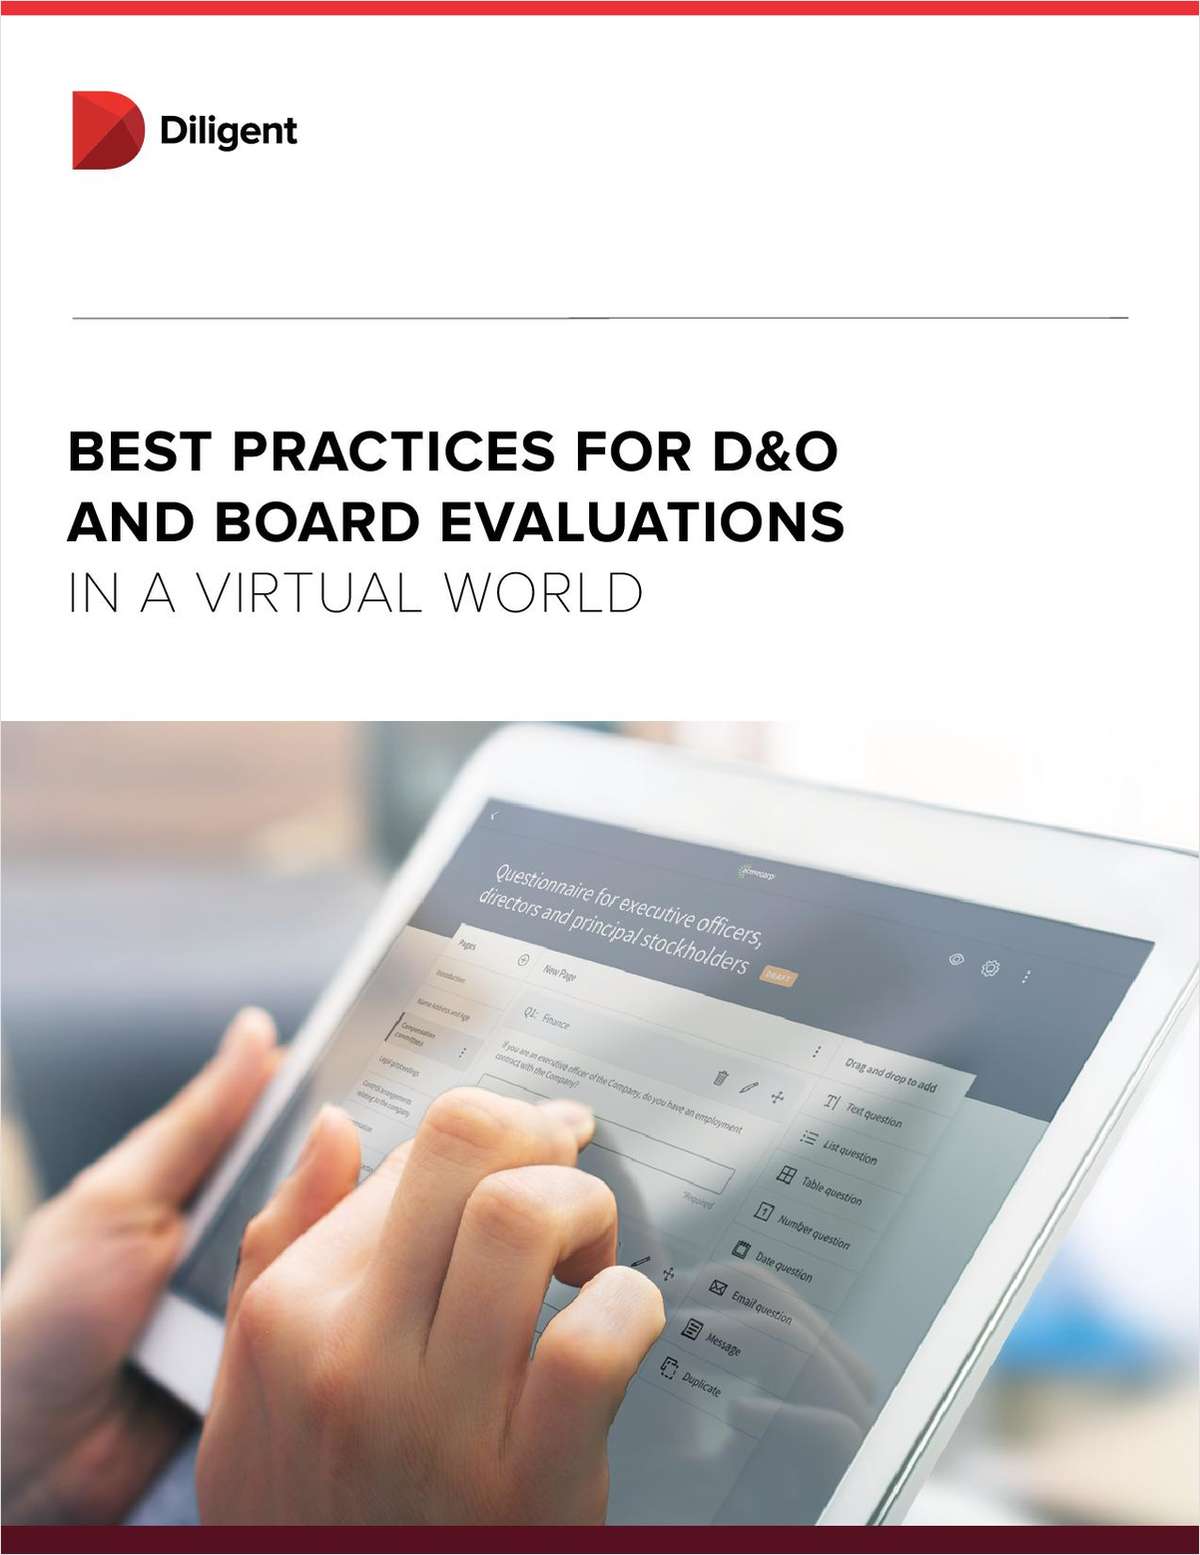 Best Practices for D&O and Board Evaluations